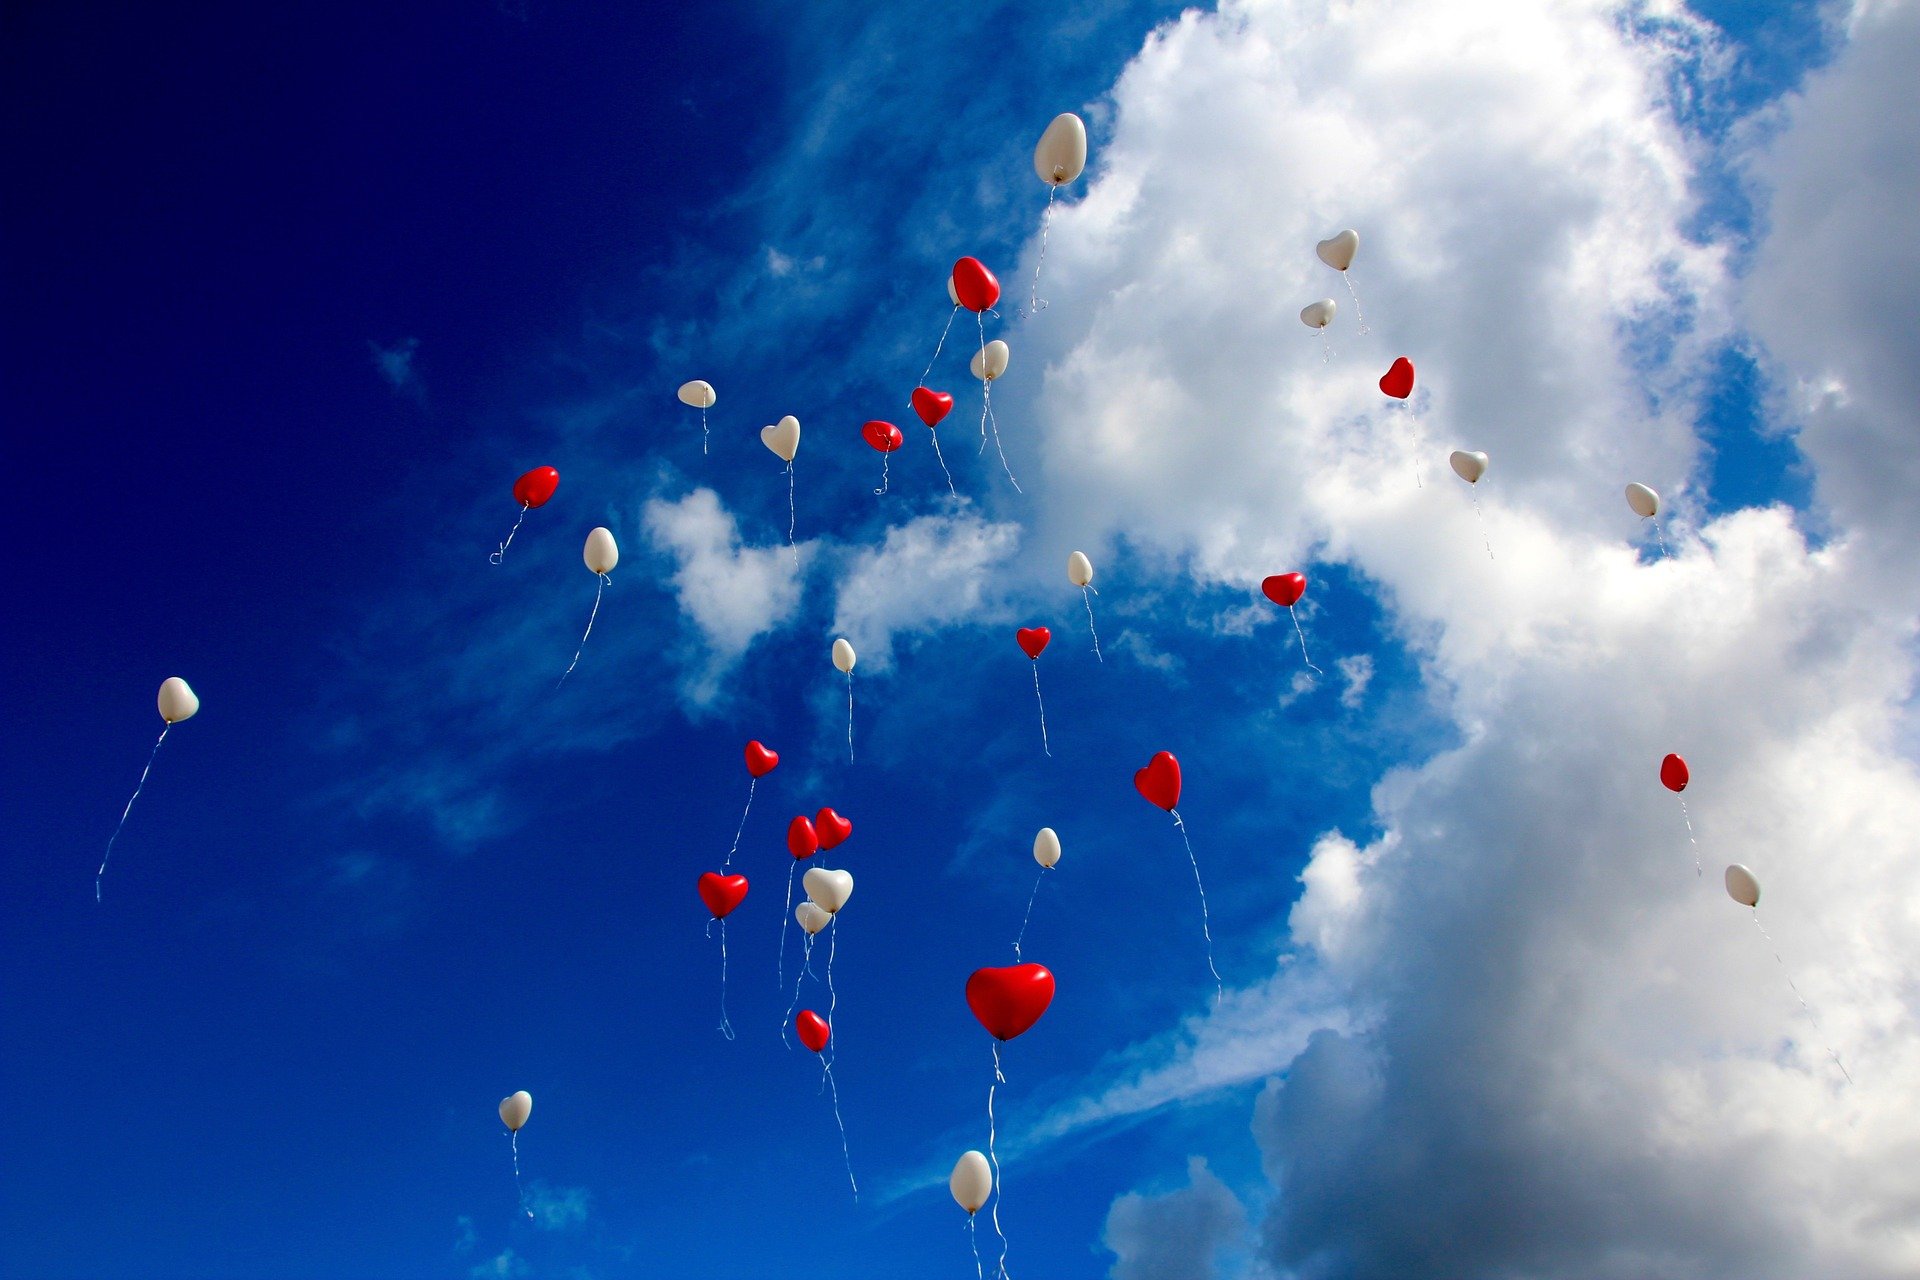 The sky with white and red heart shaped balloons floating away